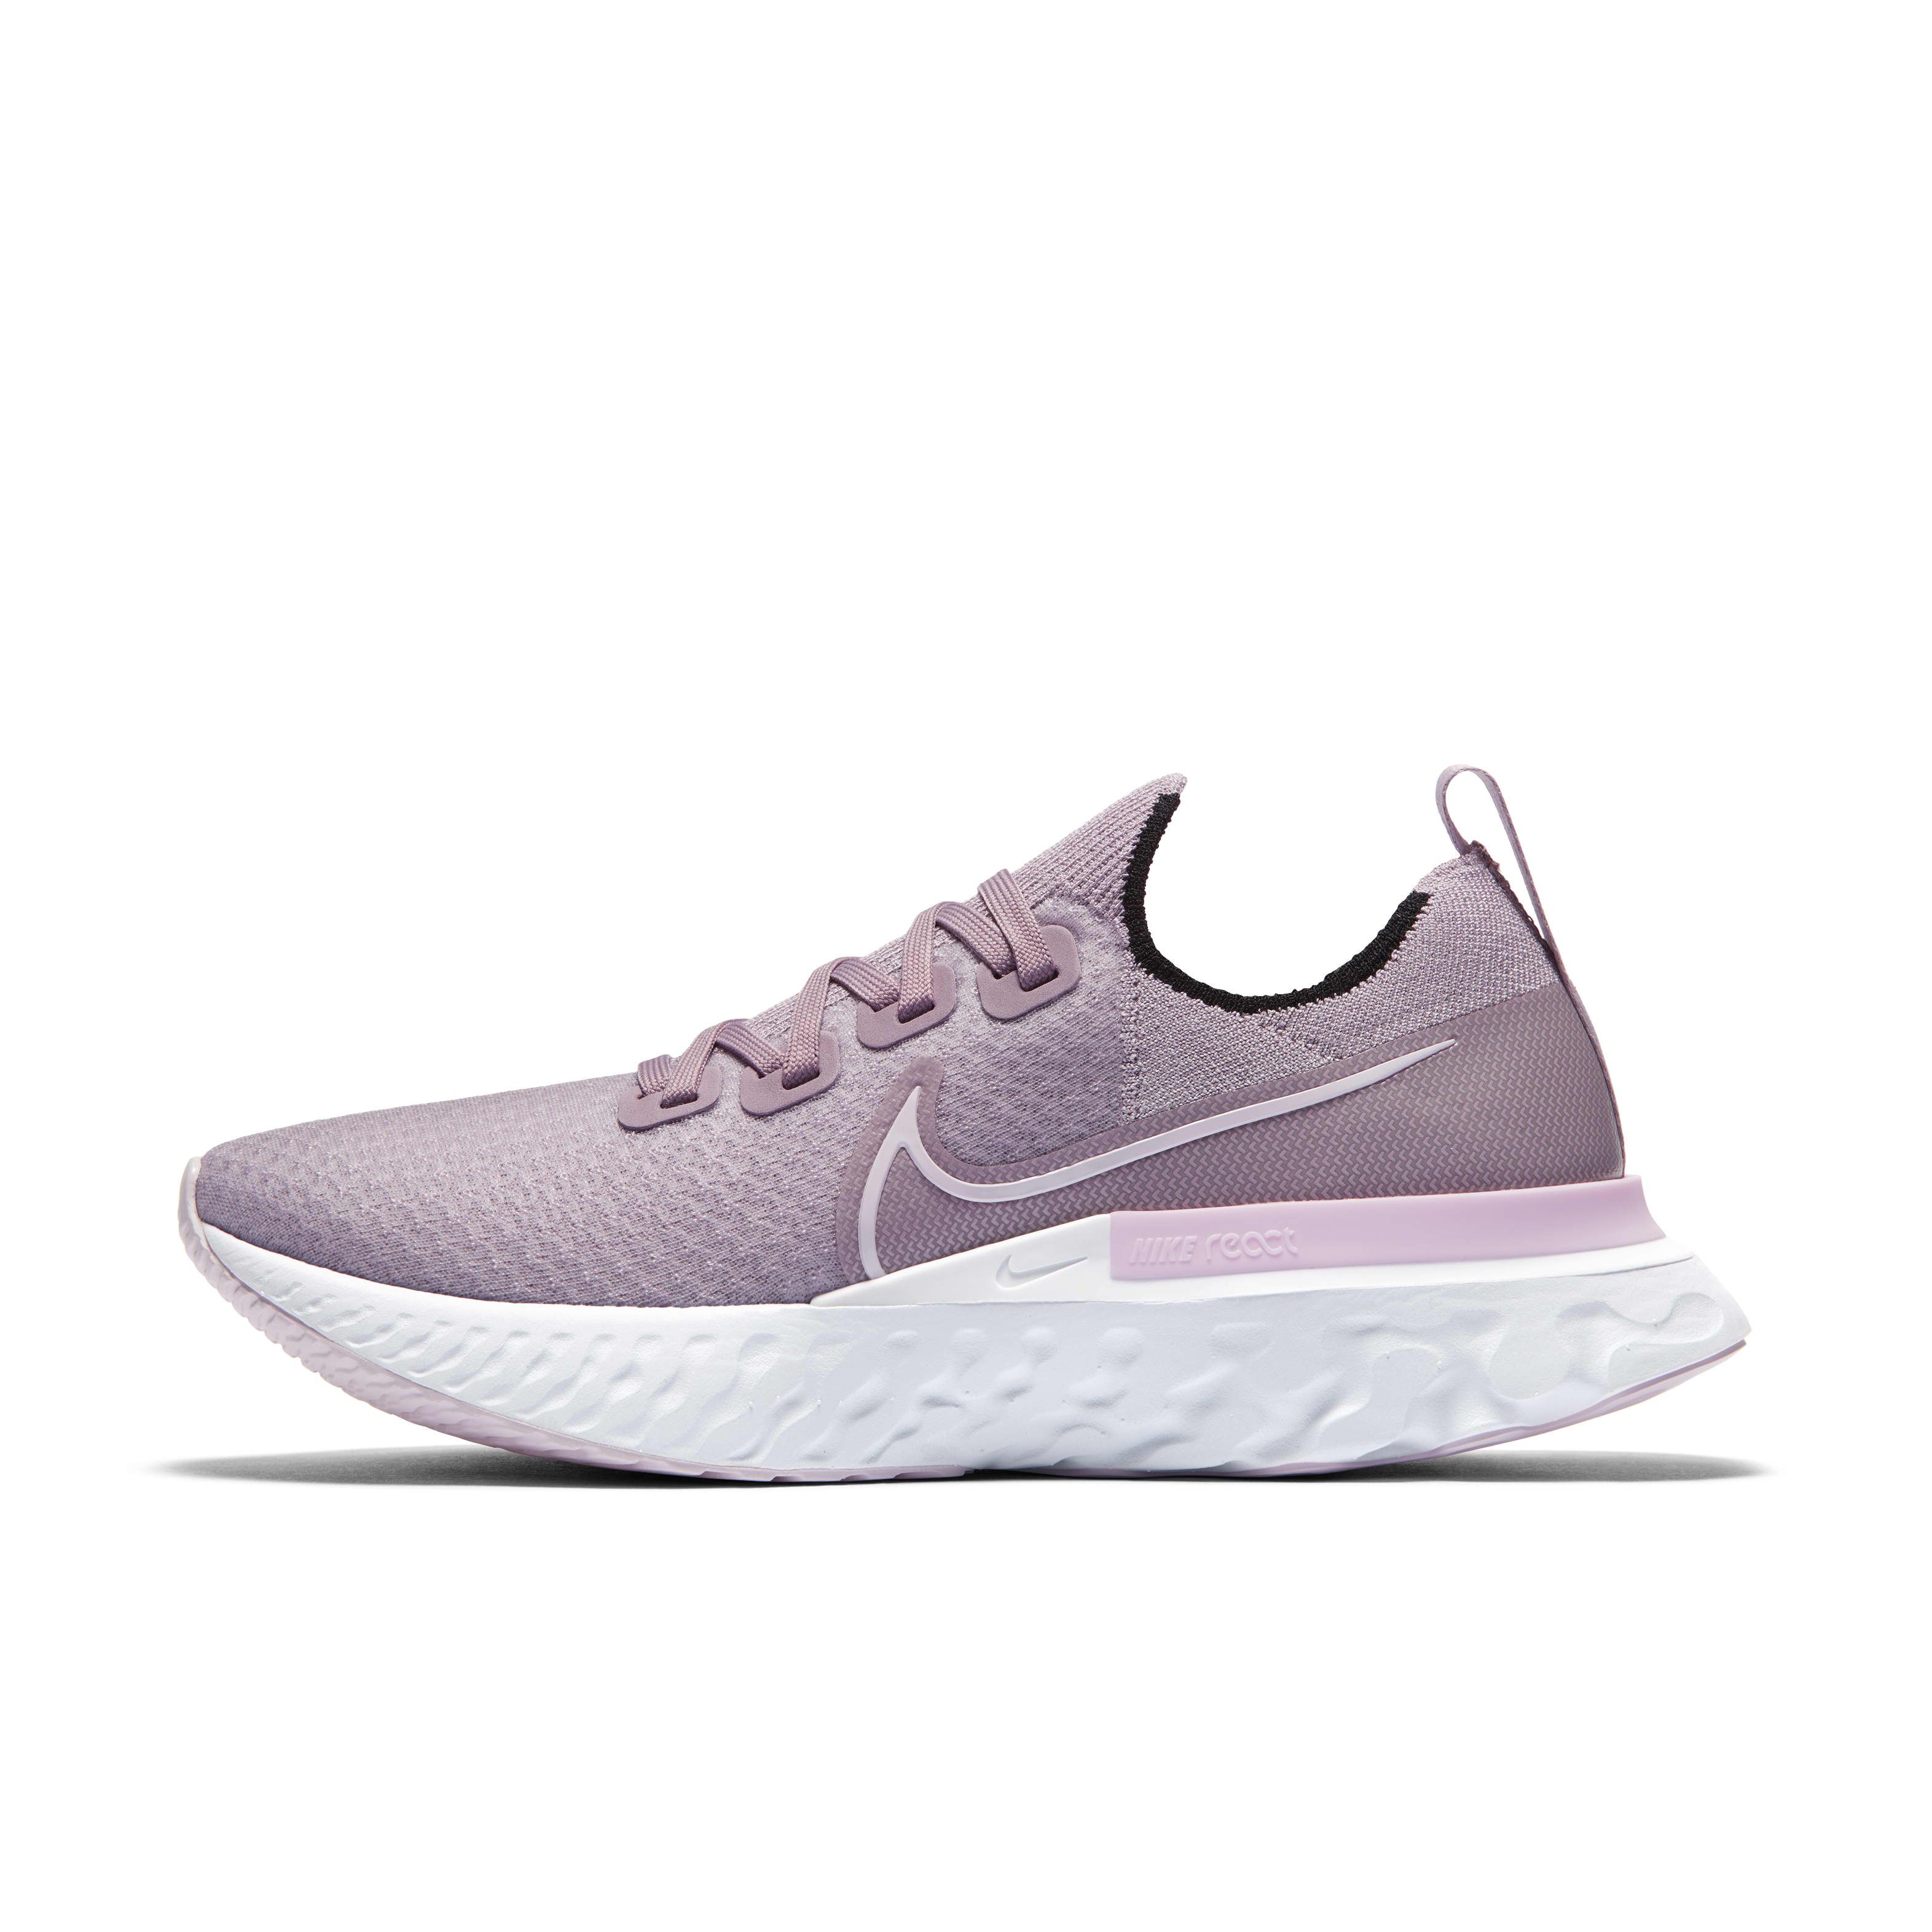 nike checkout not working